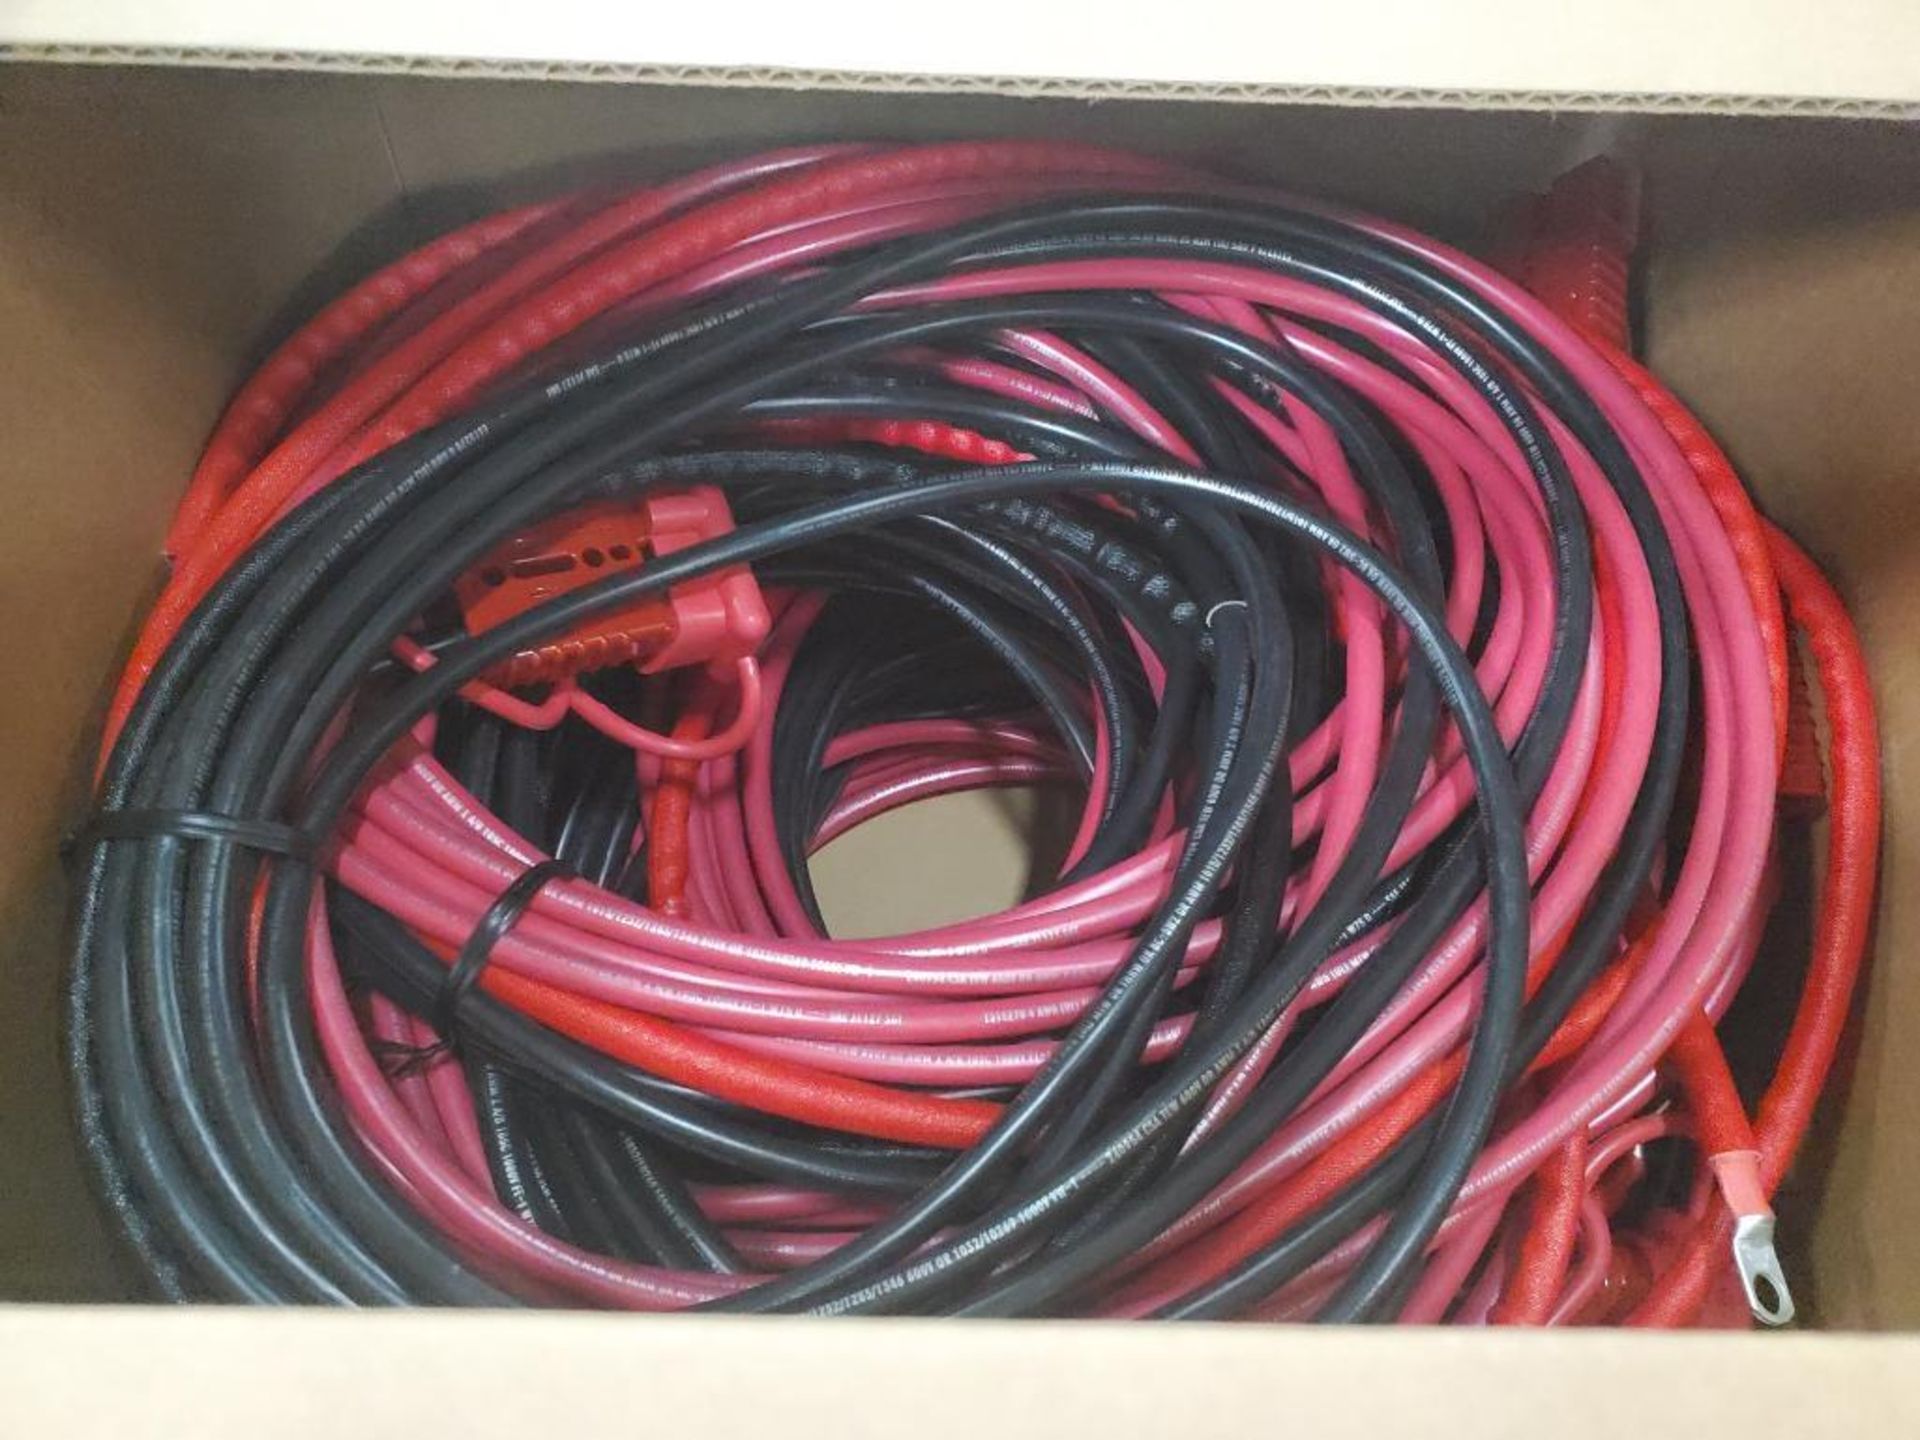 Qty 10 - Anderson 23ft battery adapter cable. RBARA23FT4-G1. 175A, 600V plug. New in box. - Image 4 of 7